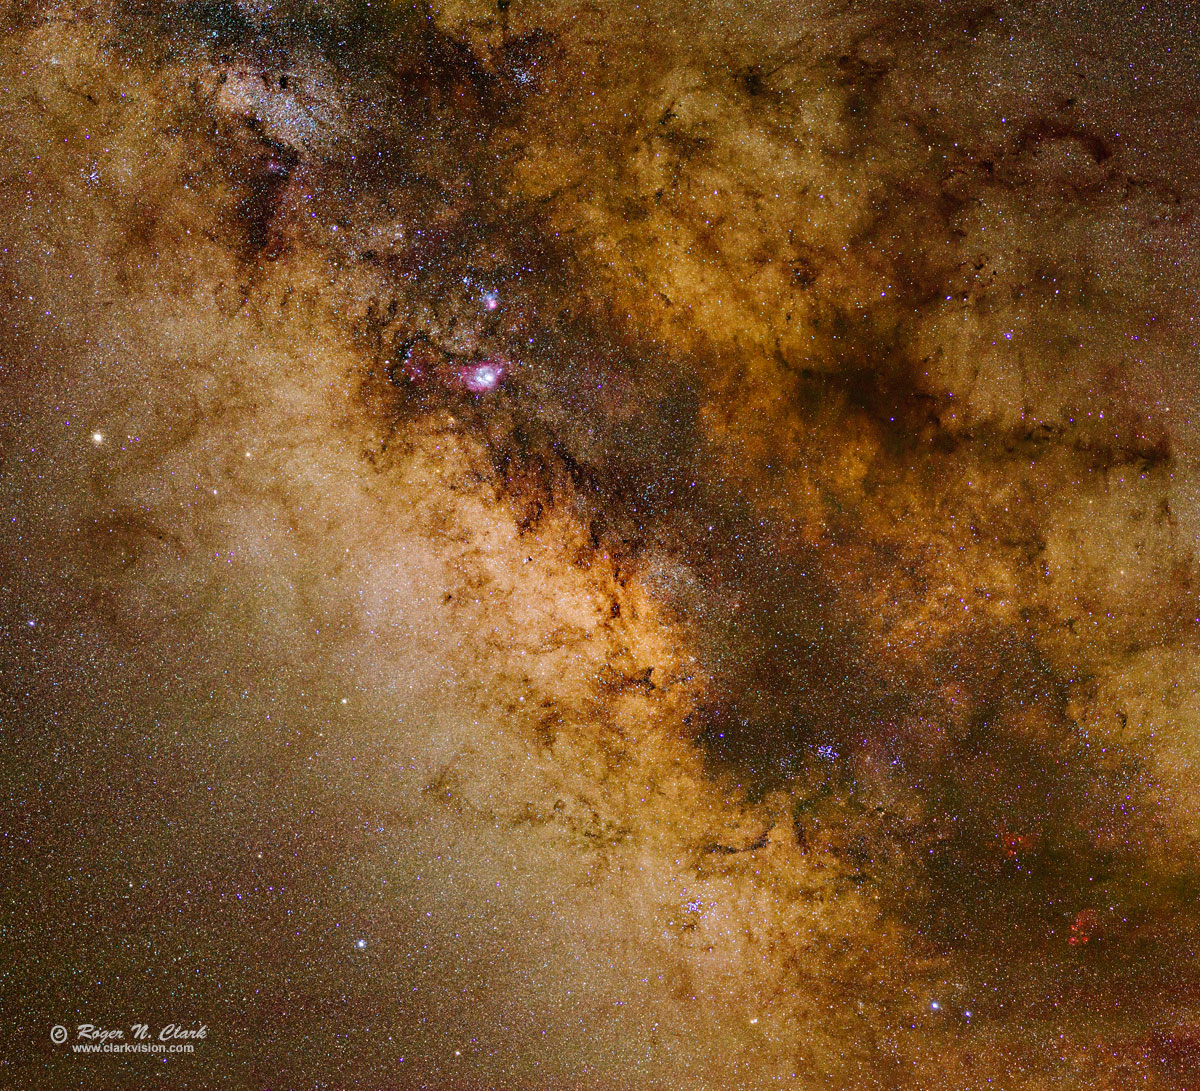 image galactic-center-100mm-f2-c06.08.2013.C45I3080-3103.l-1200-sw.jpg is Copyrighted by Roger N. Clark, www.clarkvision.com